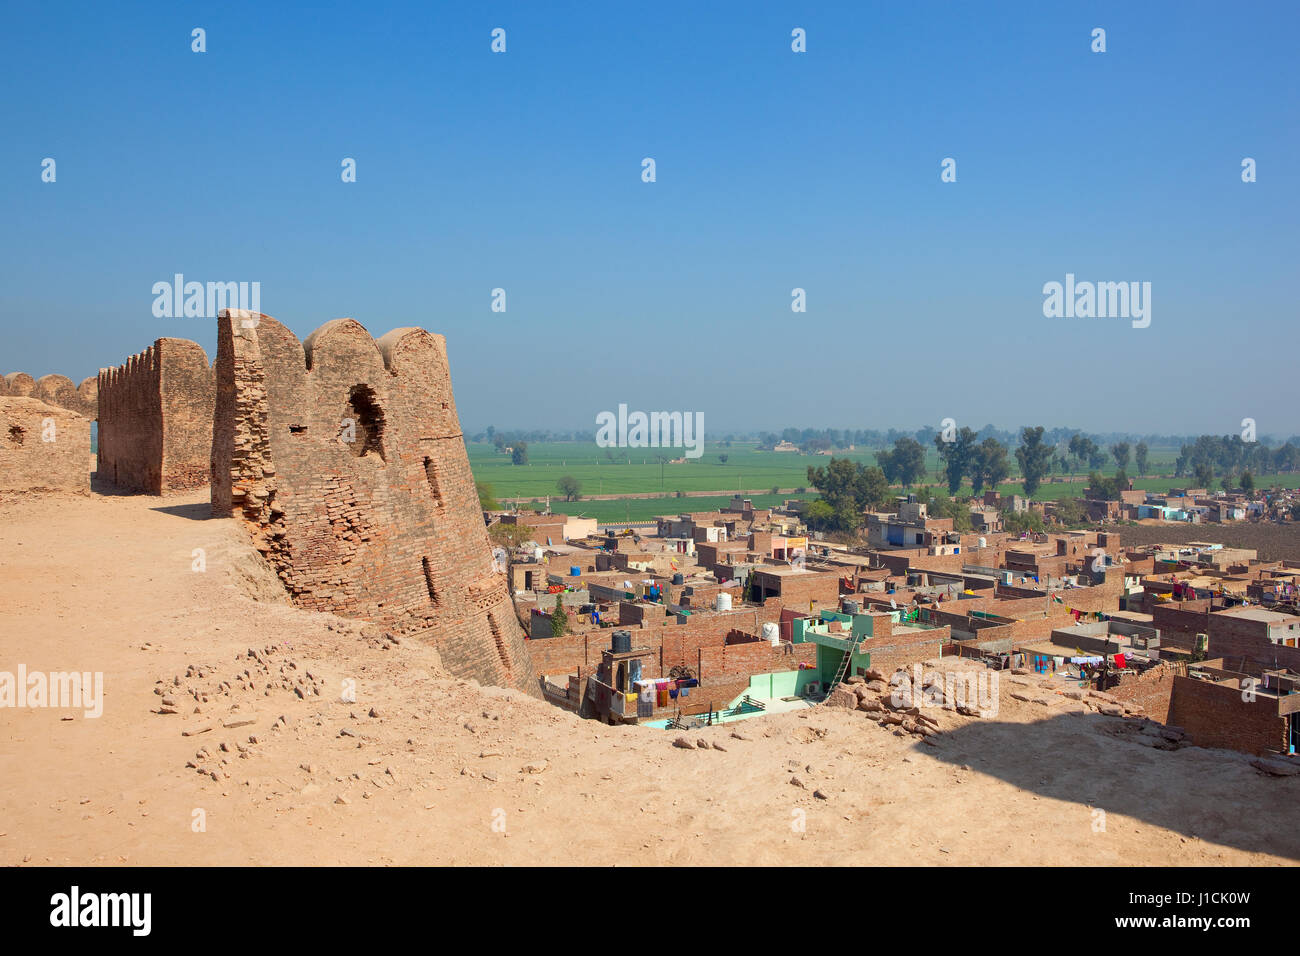 ongoing restoration work at bhatner fort overlooking the colorful buildings of hanumangarh town with views of the rajasthan countryside under a clear  Stock Photo